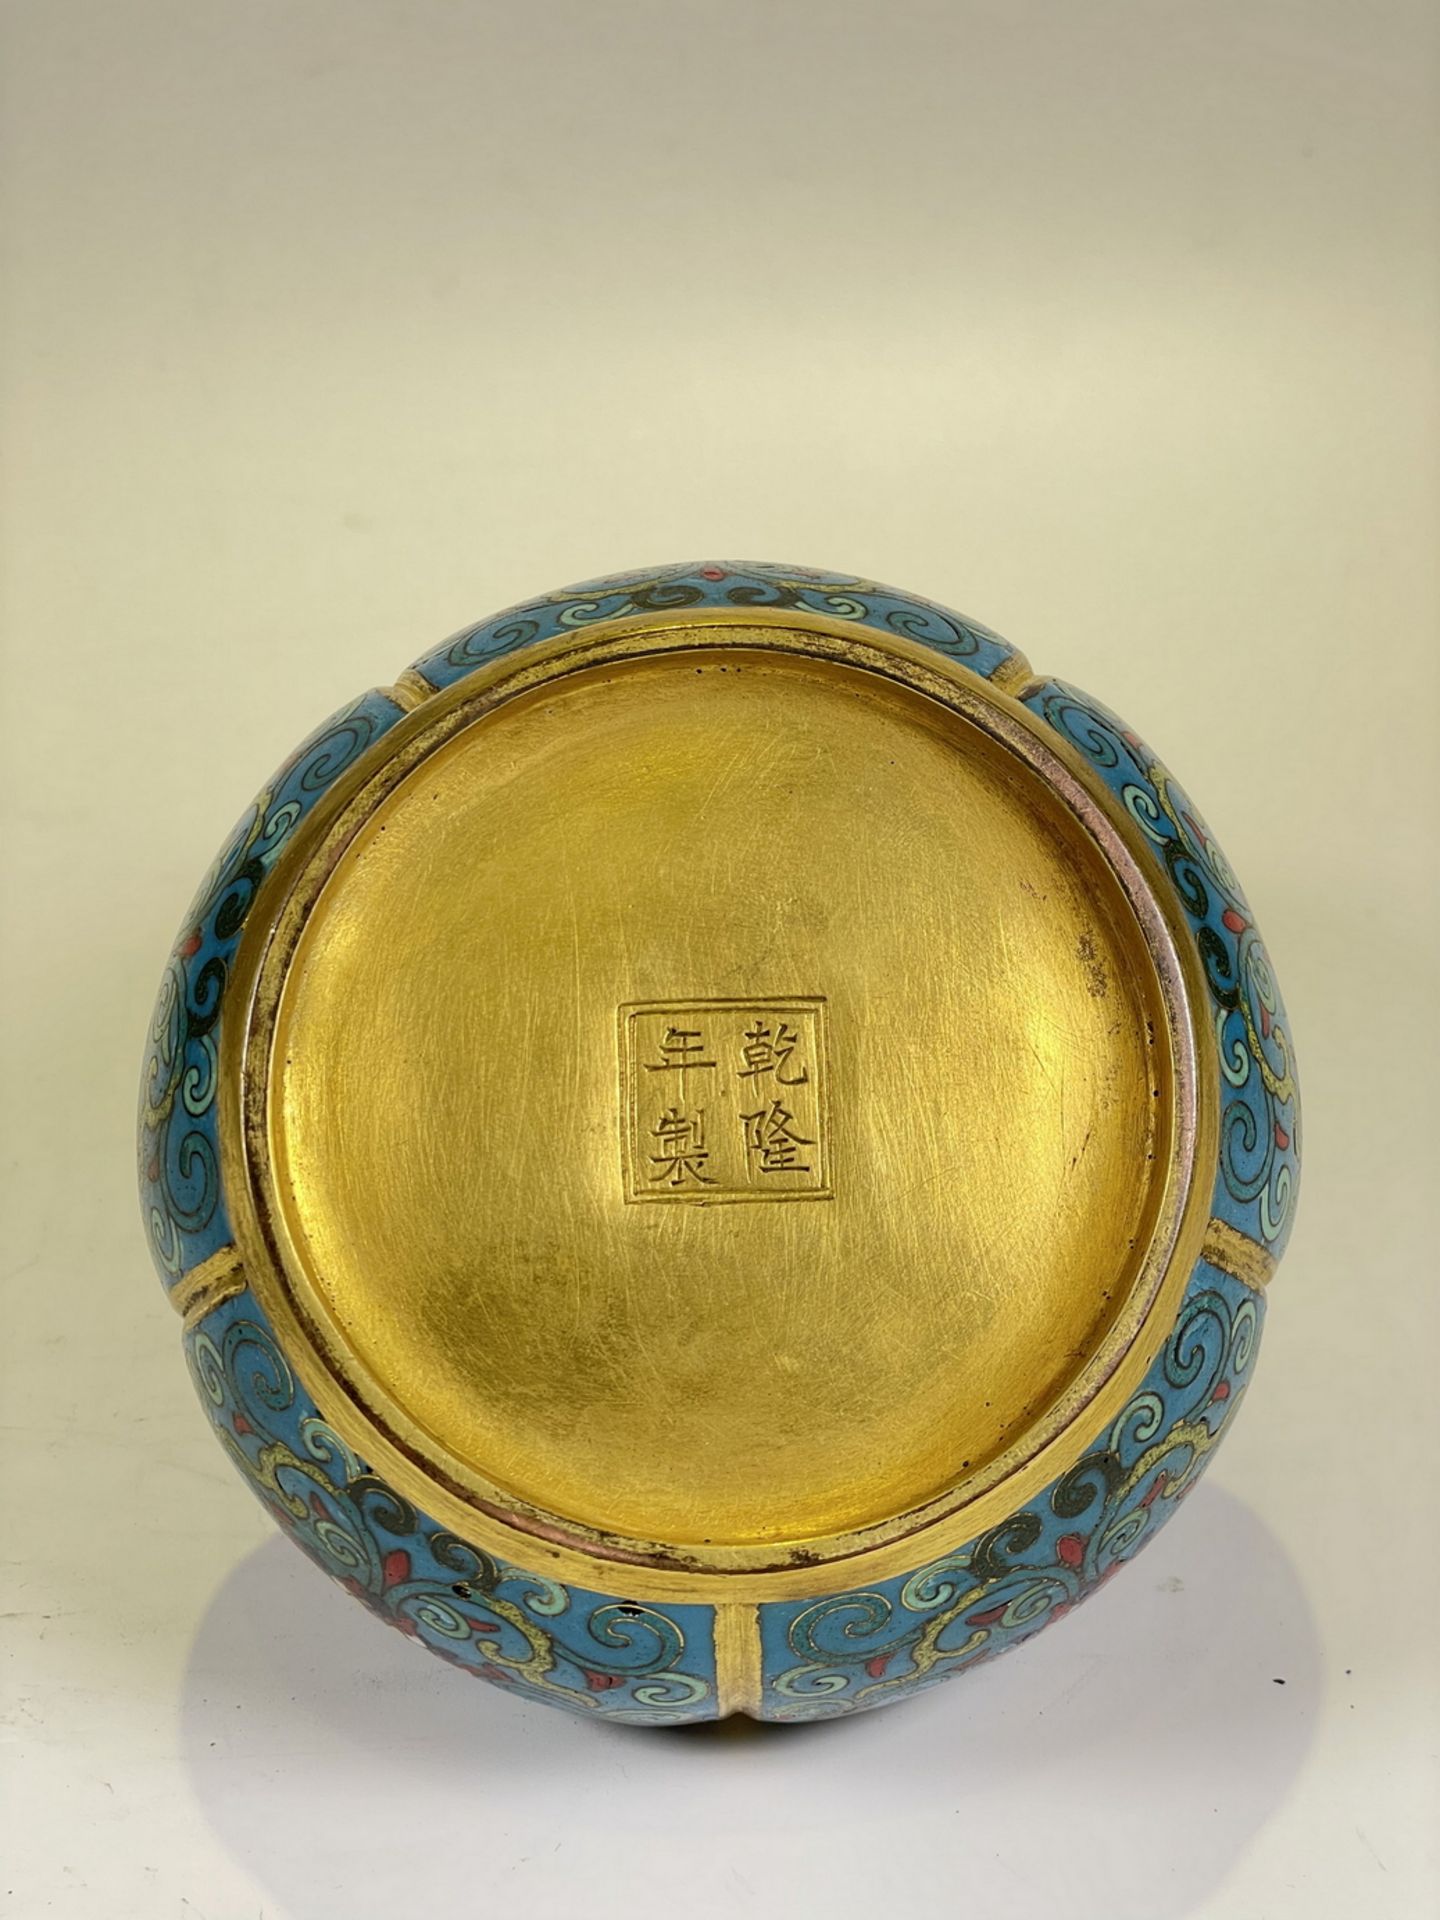 FINE CHINESE CLOISONNE, 18TH/19TH Century Pr. Collection of NARA private gallary.  - Bild 4 aus 6